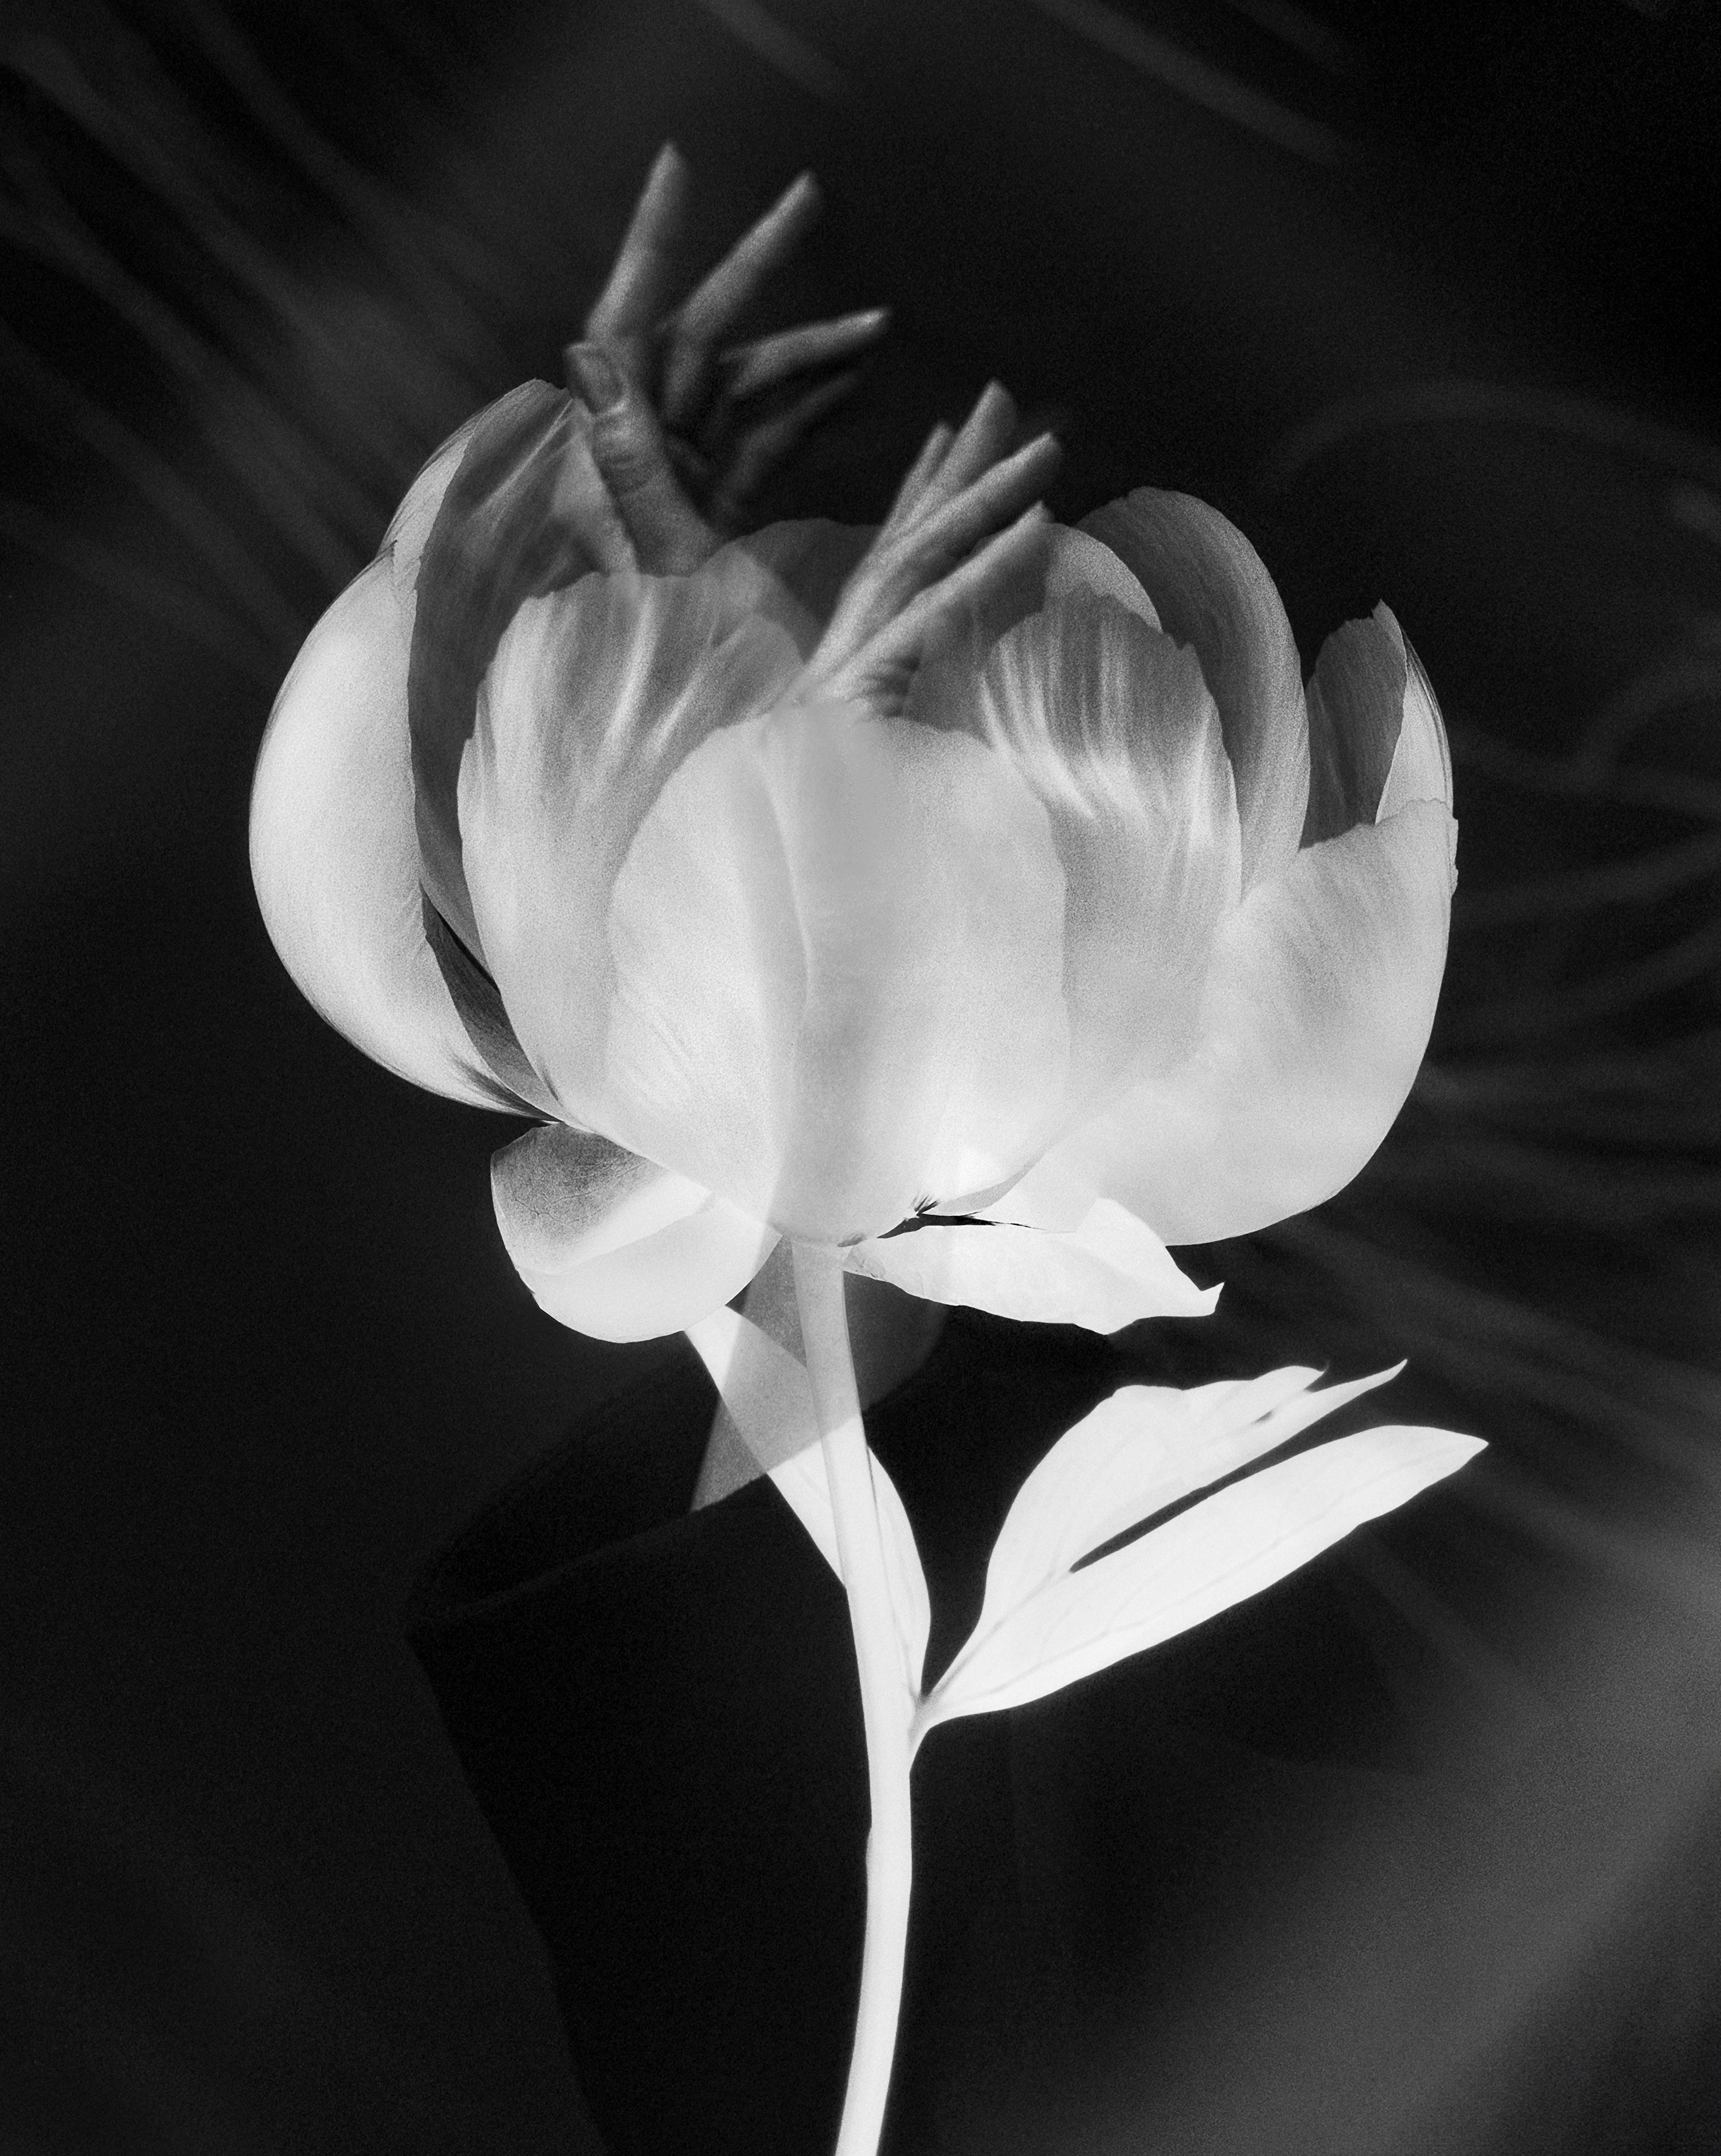 Ugne Pouwell Black and White Photograph - 'Blooming hands' double exposure fine art photography, edition of 20